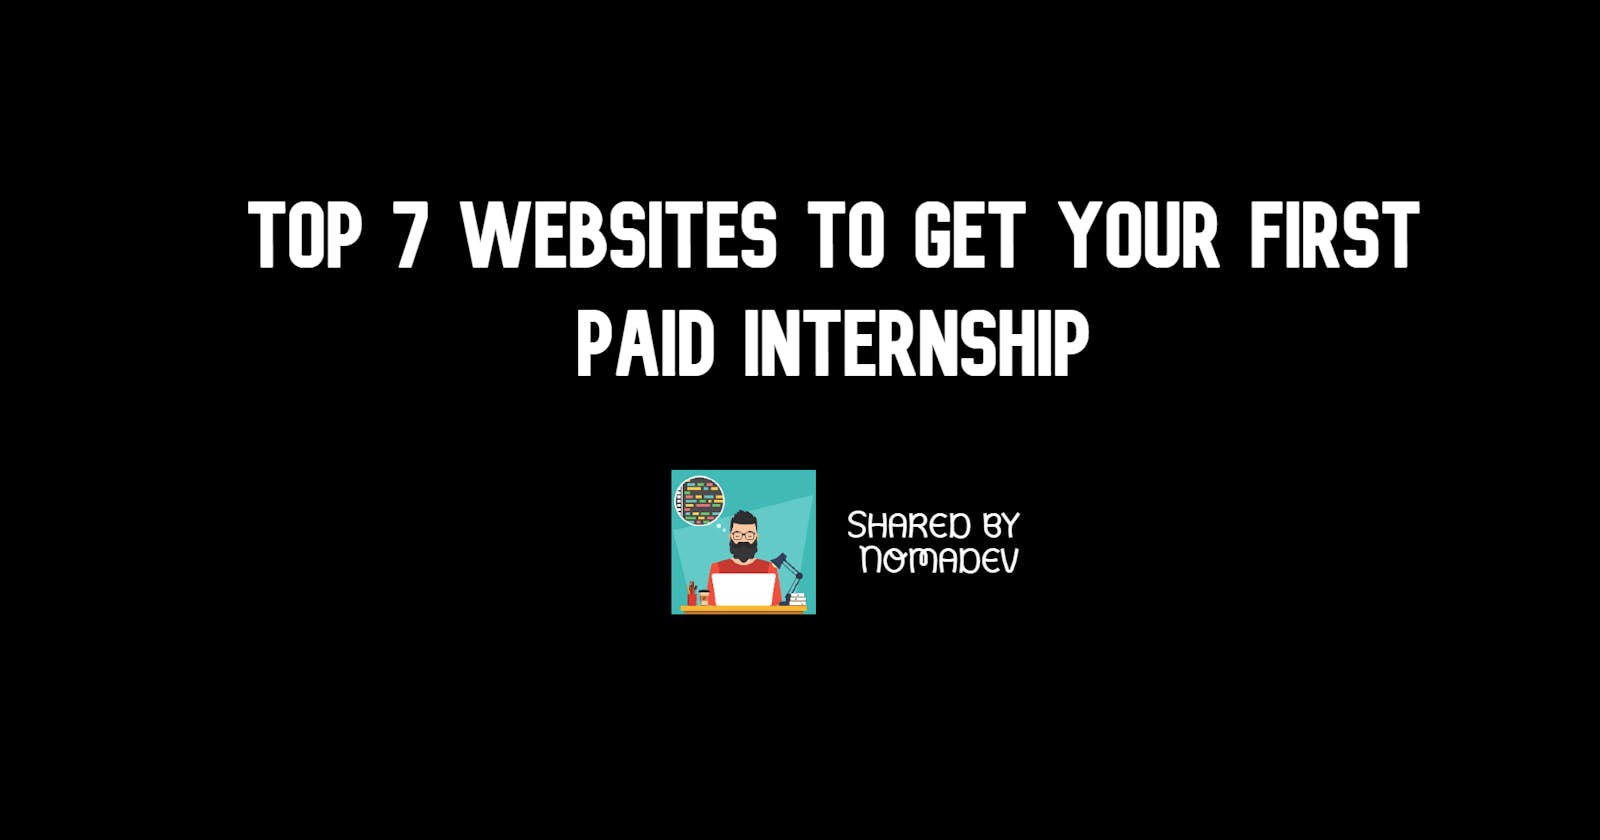 Top 7 Websites To Get Your First Paid Internship